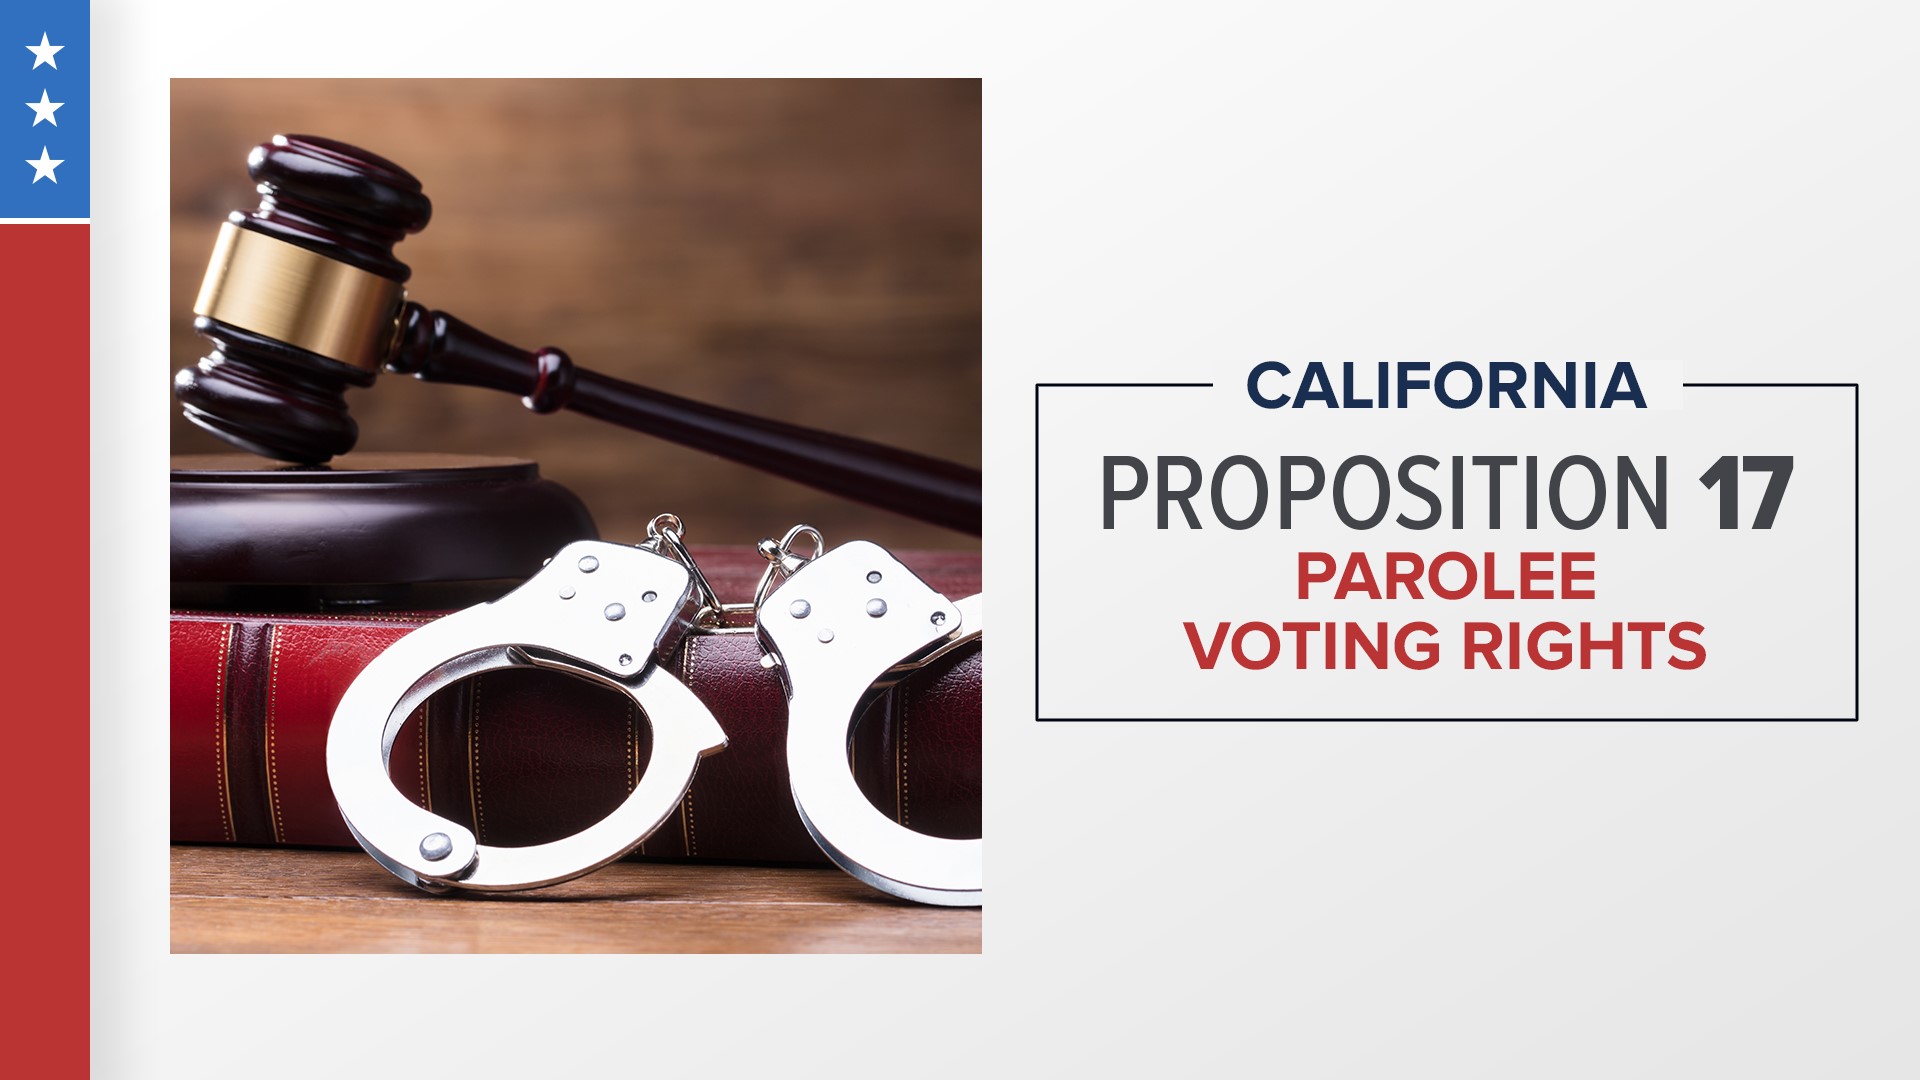 Proposition 17 is on the ballot to amend the California constitution to allow those out on parole the right to vote.